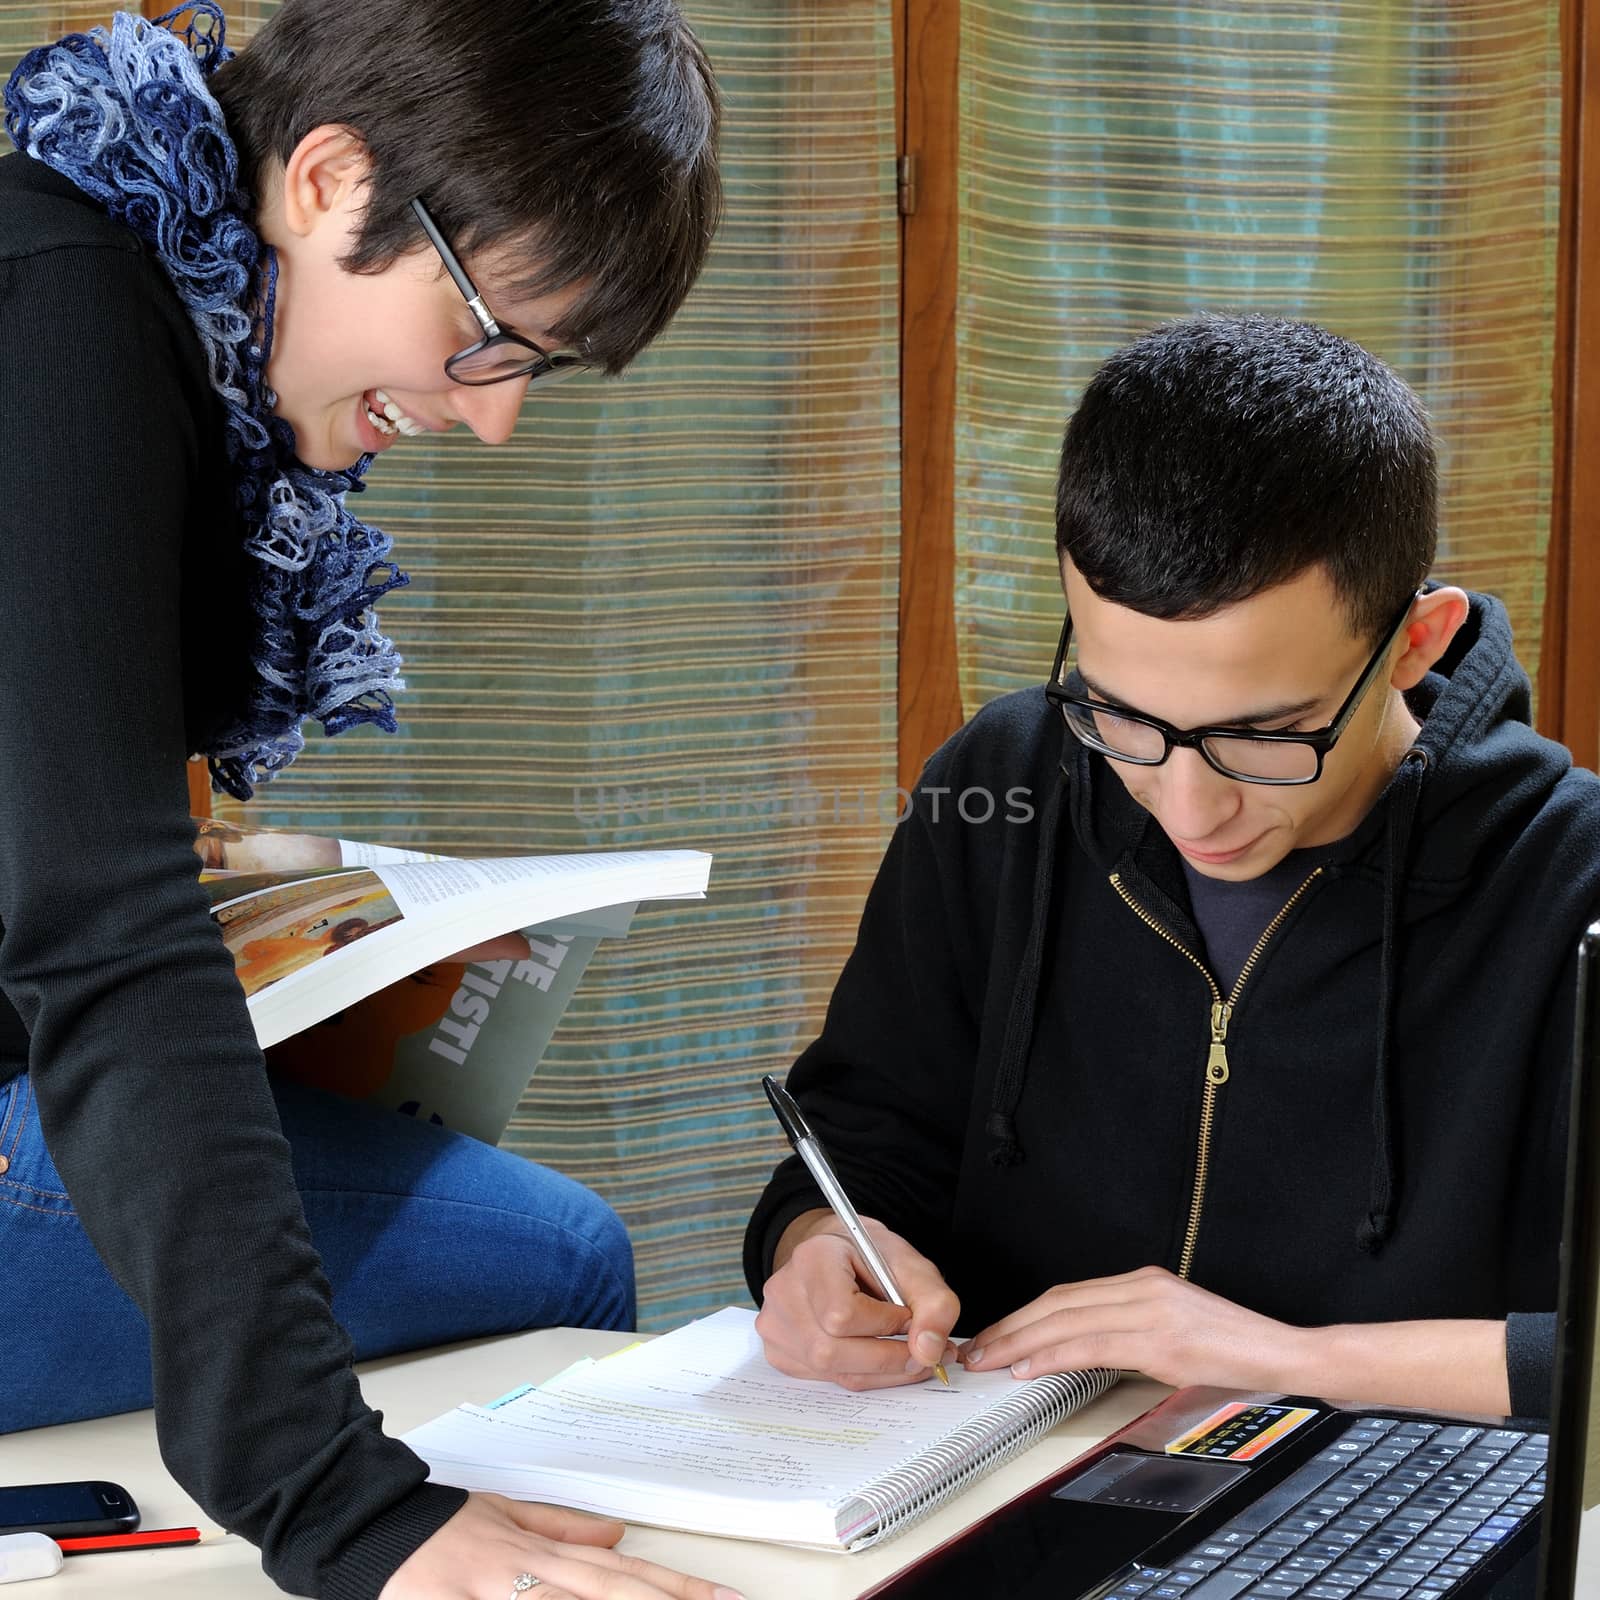 Students engaged in the study